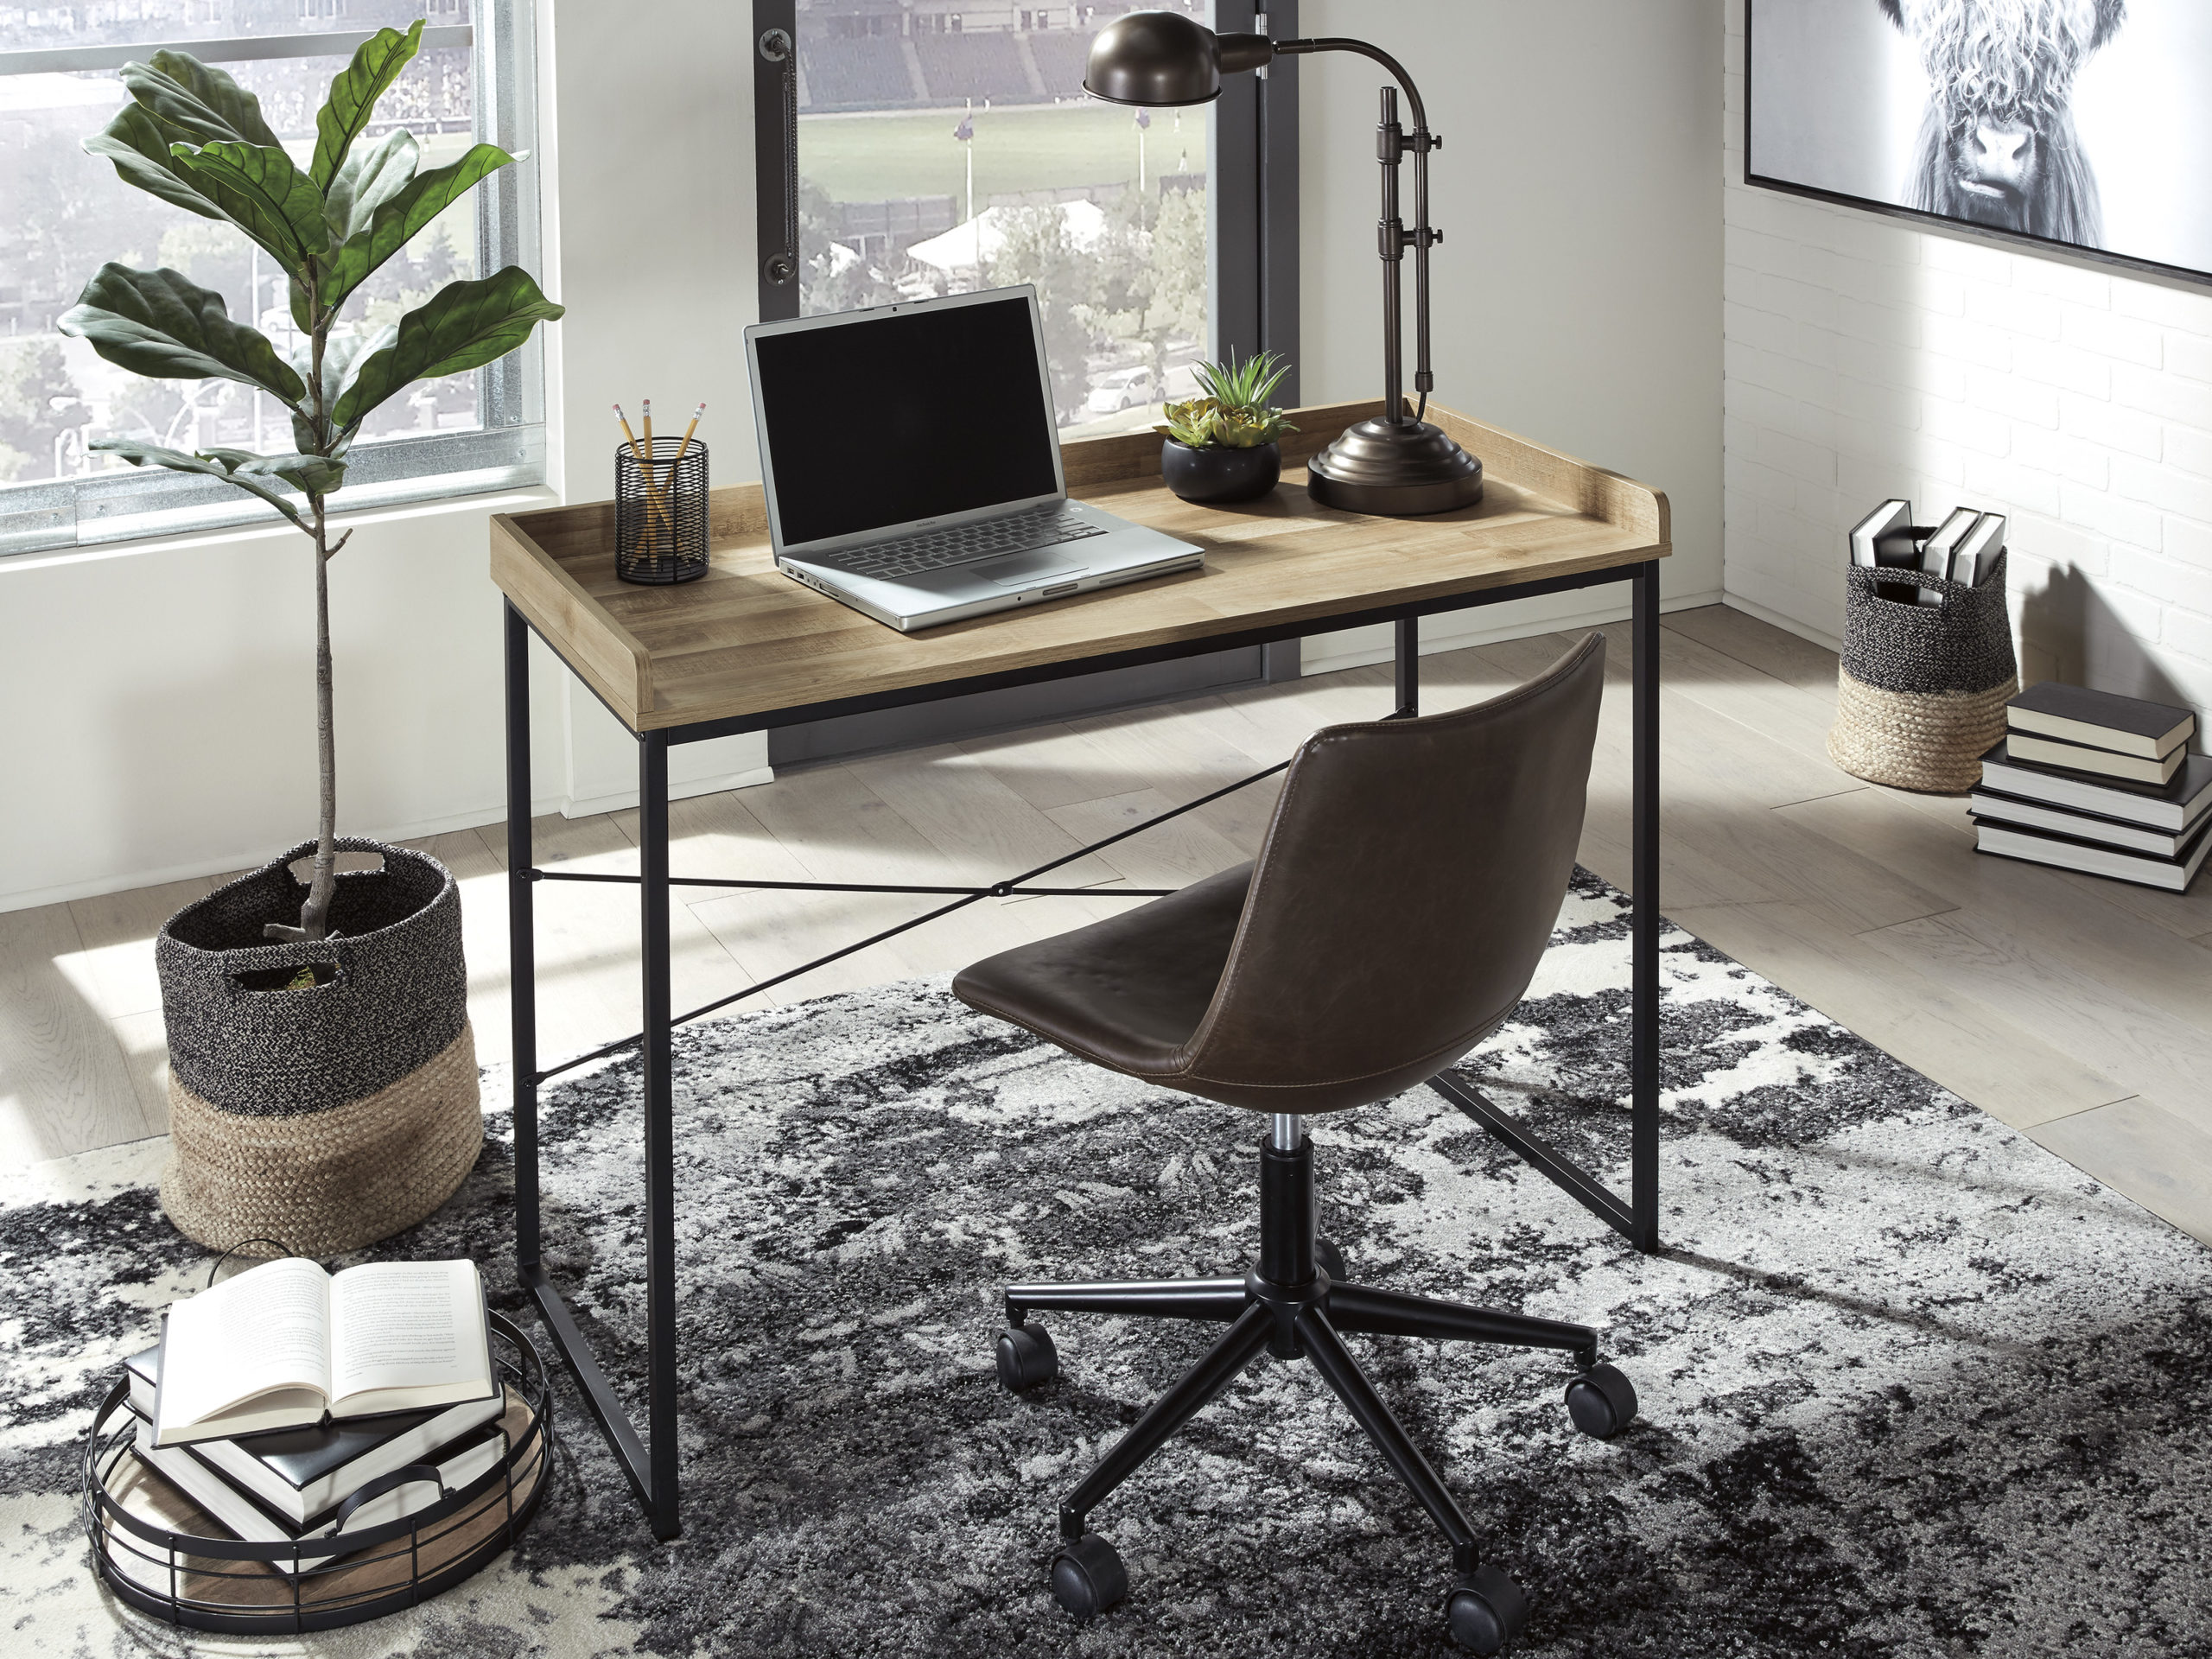 5 Places to Set Up a Home Office in Your Living Space